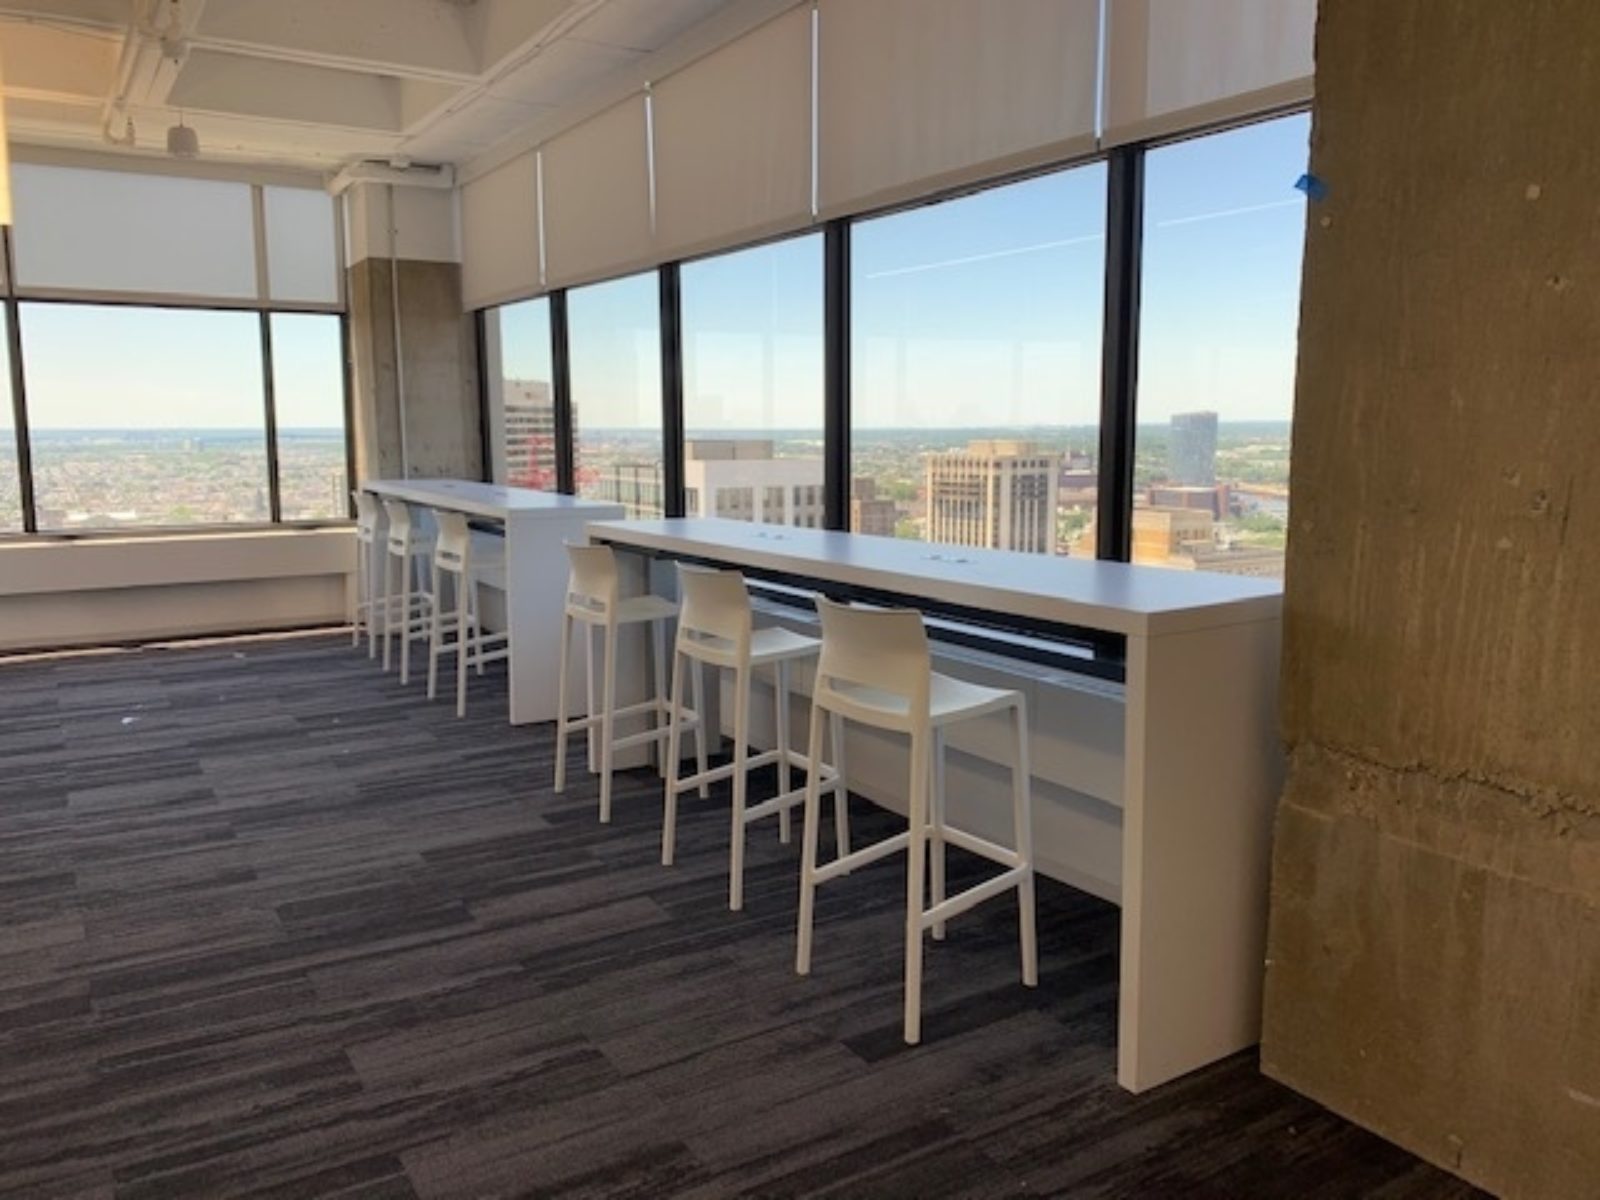 Bar-height white tables with white barstools; tables are along a wall of windows so the chairs are facing out to the view of the city.